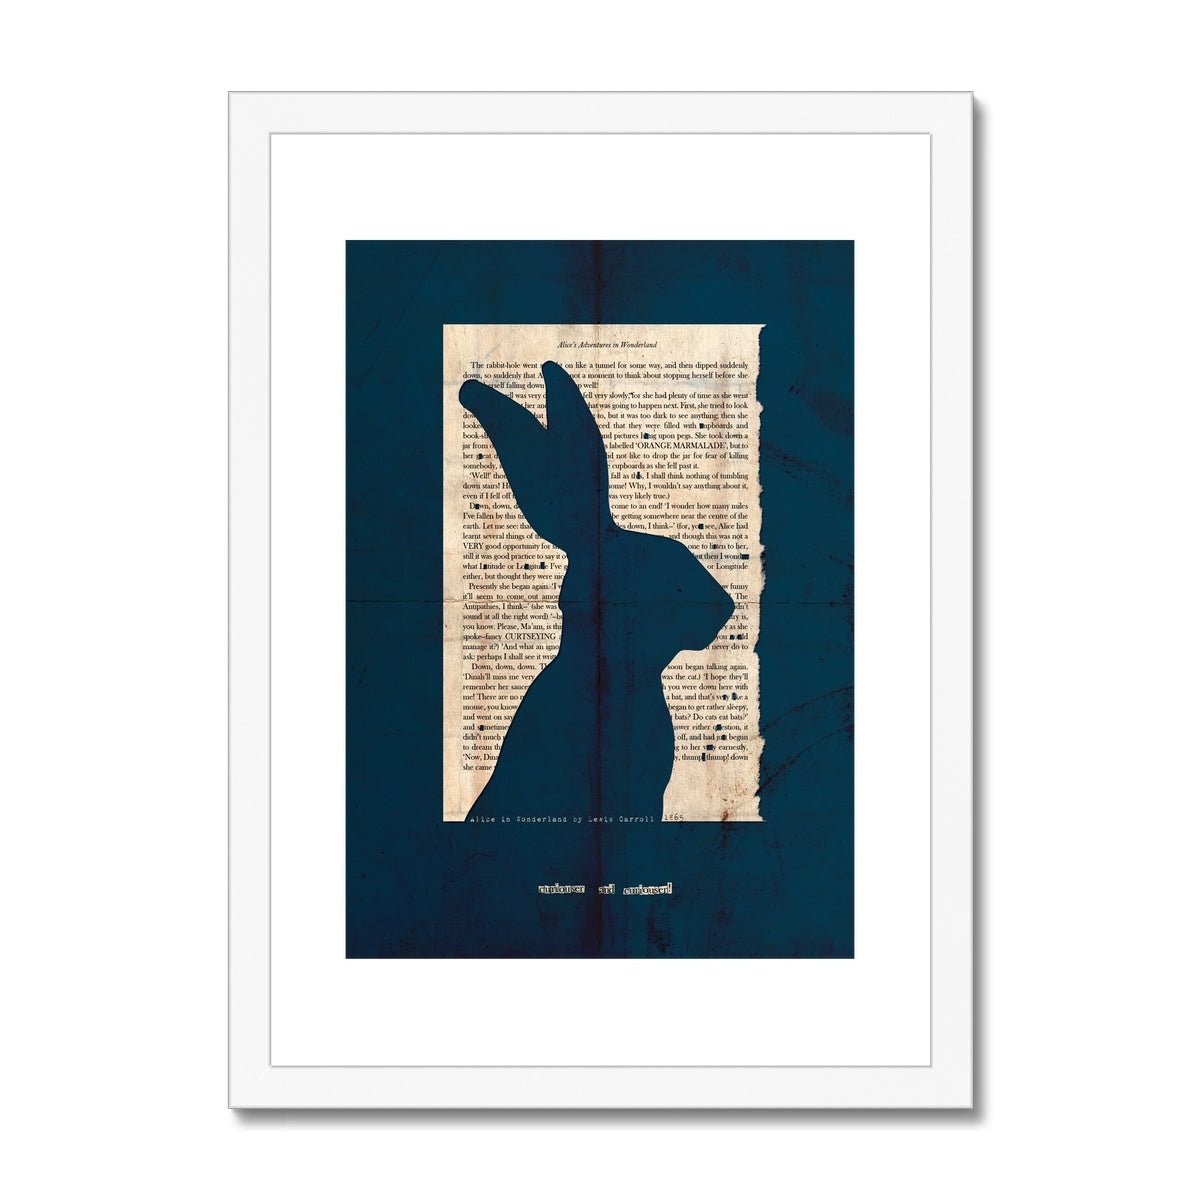 A white wooden framed fine art print showing a page from Alice in Wonderland with the silhouette of a Hare cut out on a navy blue background with the line "curiouser and curiouser" also cut out